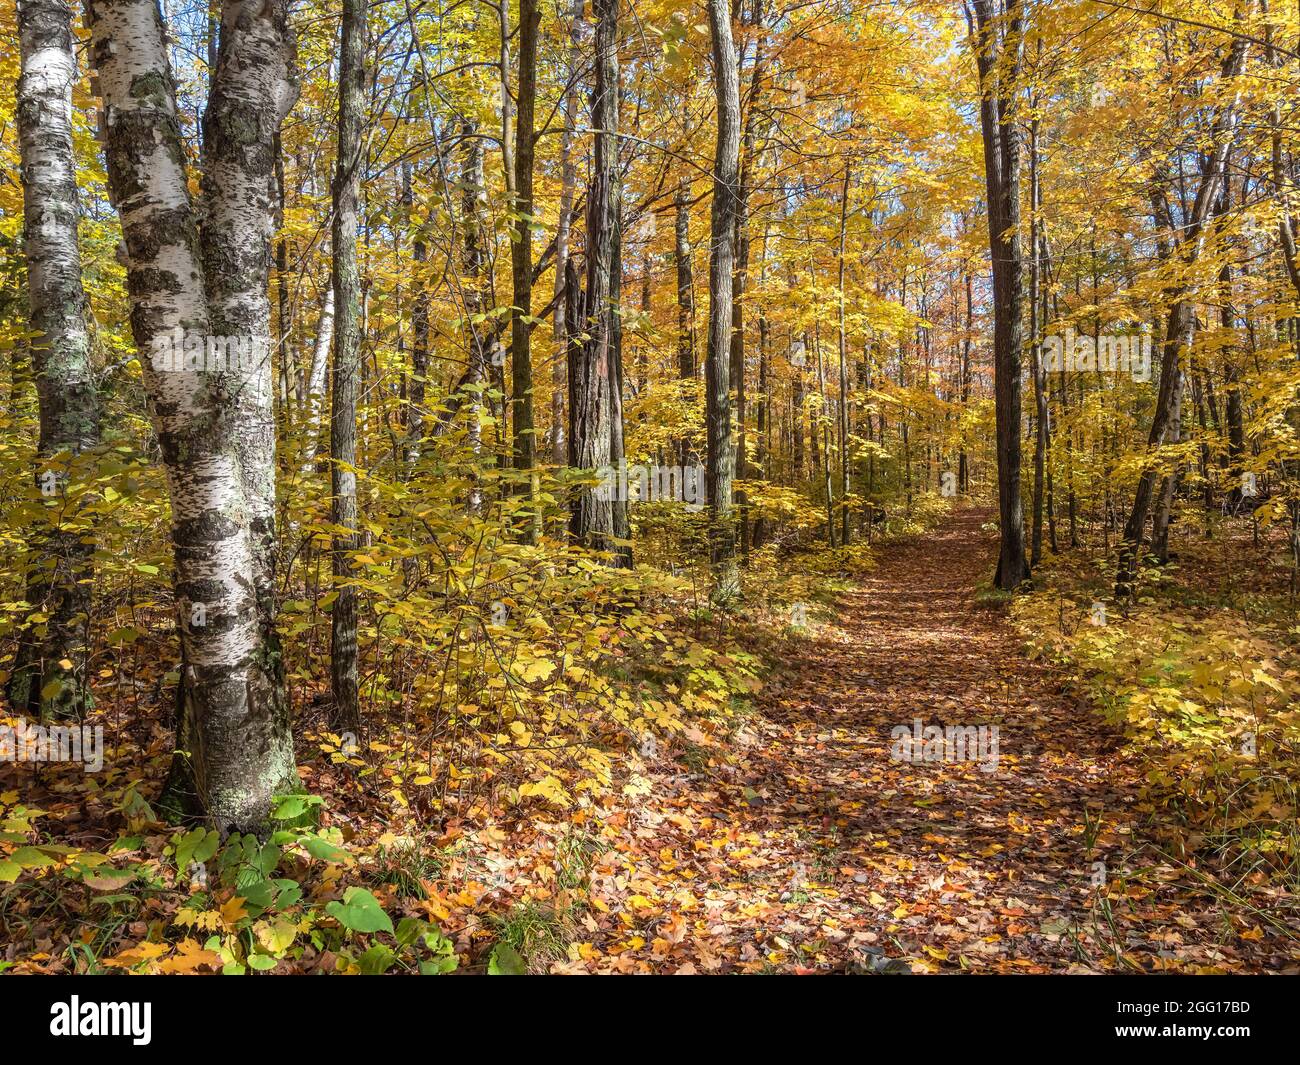 Foot path through a golden hardwood forest in autumn Stock Photo